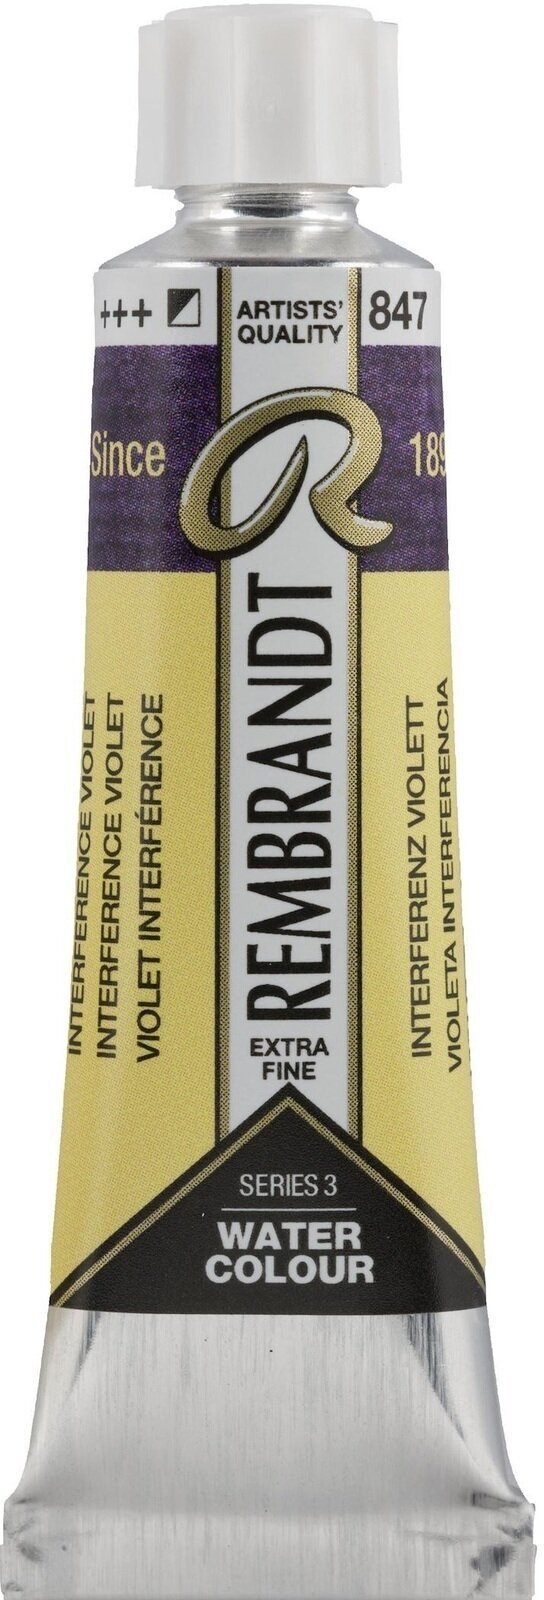 Nερομπογιά Rembrandt Watercolour Paint 10 ml Interference Violet